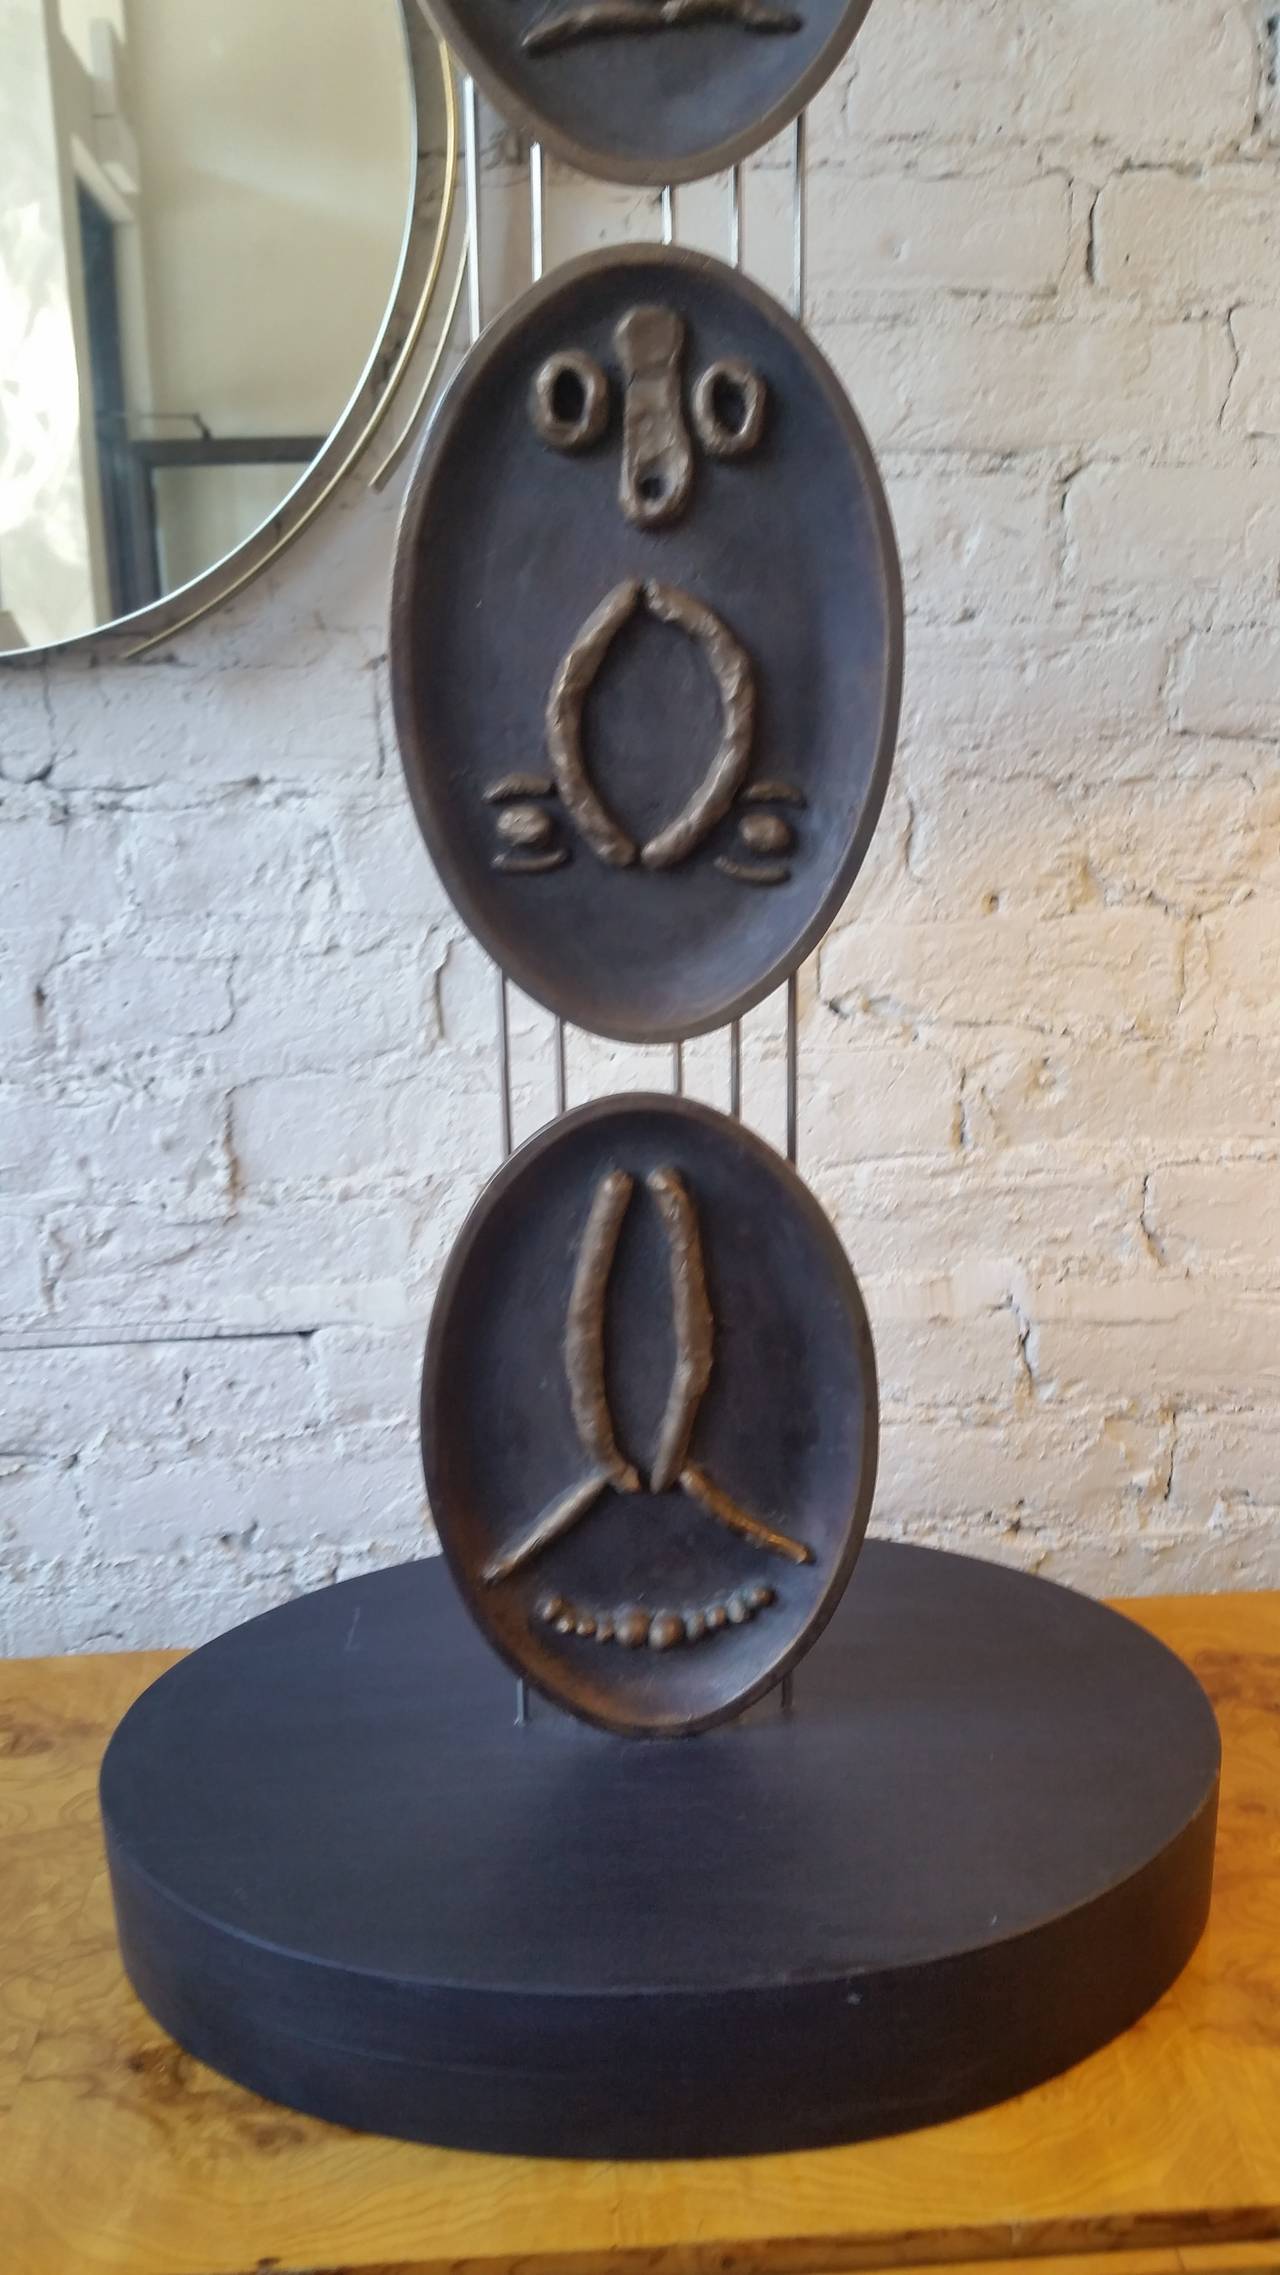 A bronze four panel Picasso Style Totem by
noted sculptor Richard Light. Signed 1 of 4
2014. Light from Kalamazoo, Michigan is a graduate
of Yale University, The Art Institute of Chicago
and Ecole des Beaux Arts IN Paris.
His work is included in